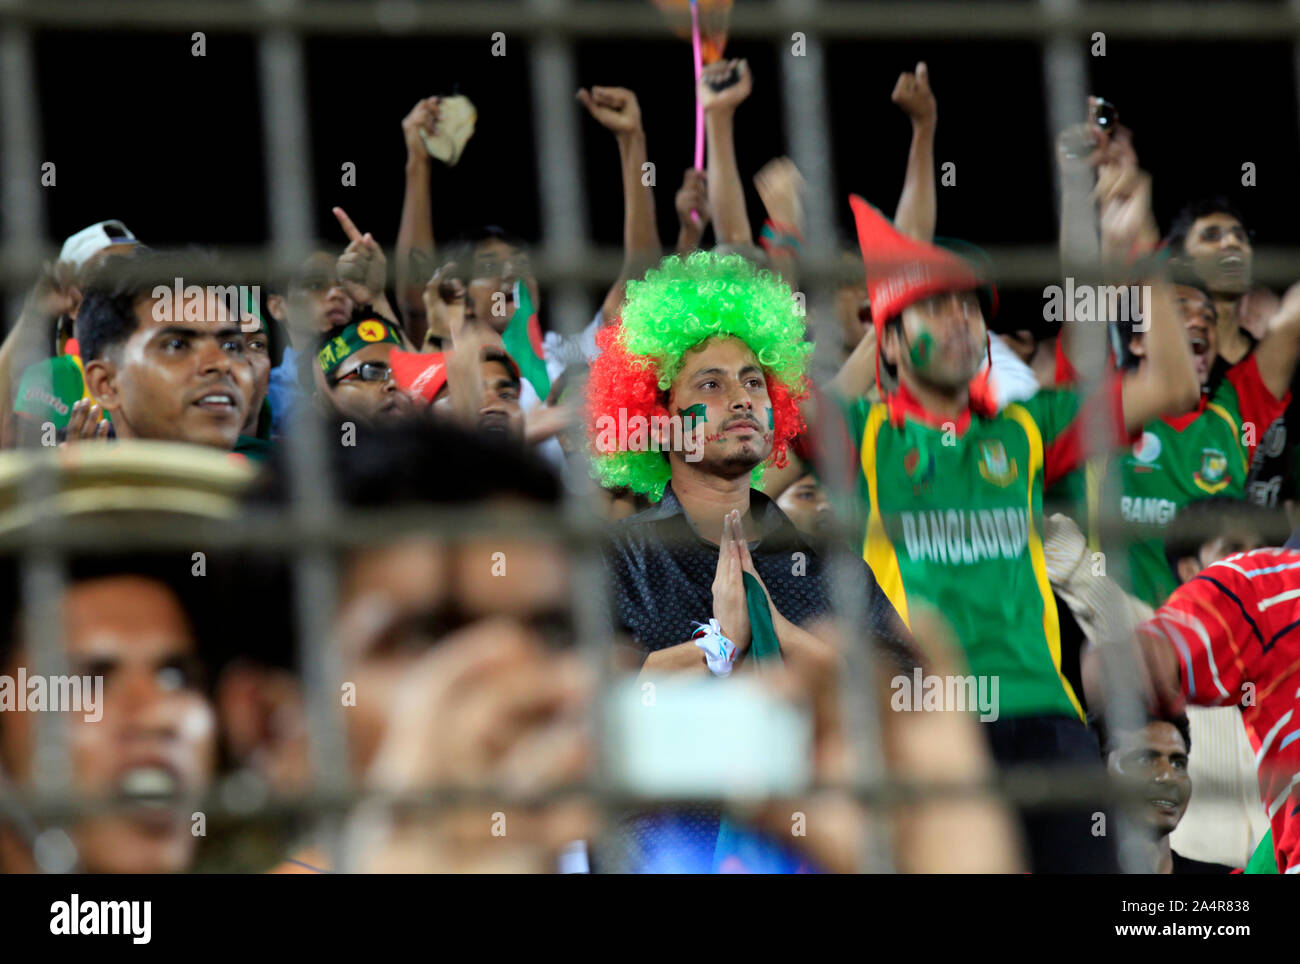 Bangladeshi cricket fans cheer for their team, at the England versus Bangladesh match of the ICC Cricket World Cup 2011, in Zahur Ahmed Chowdhury Stadium, Chittagong, Bangladesh. March 11, 2011. Stock Photo